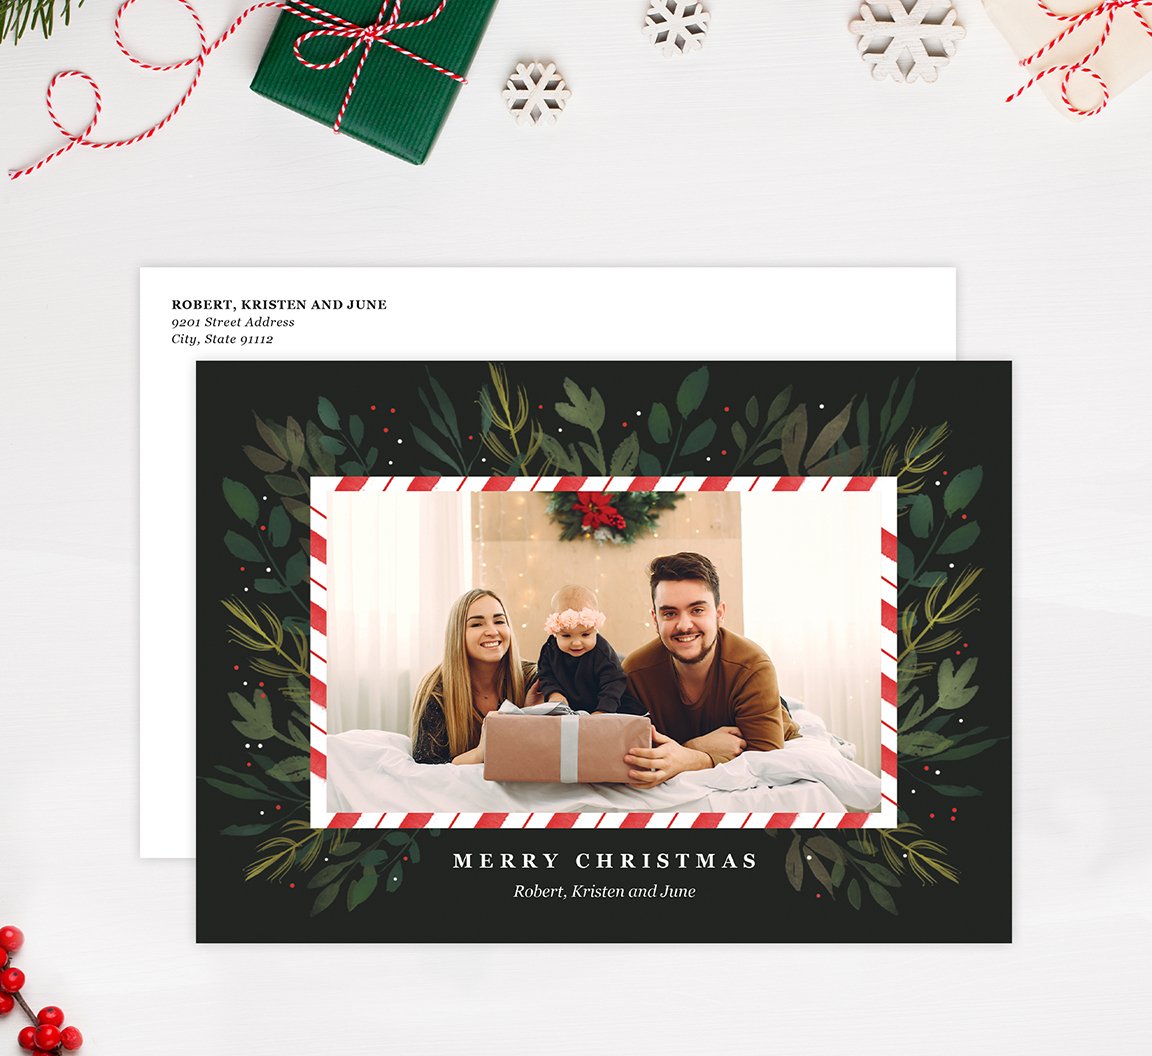 Candy Cane Frame Holiday Card Mockup; Holiday card with envelope and return address printed on it. 